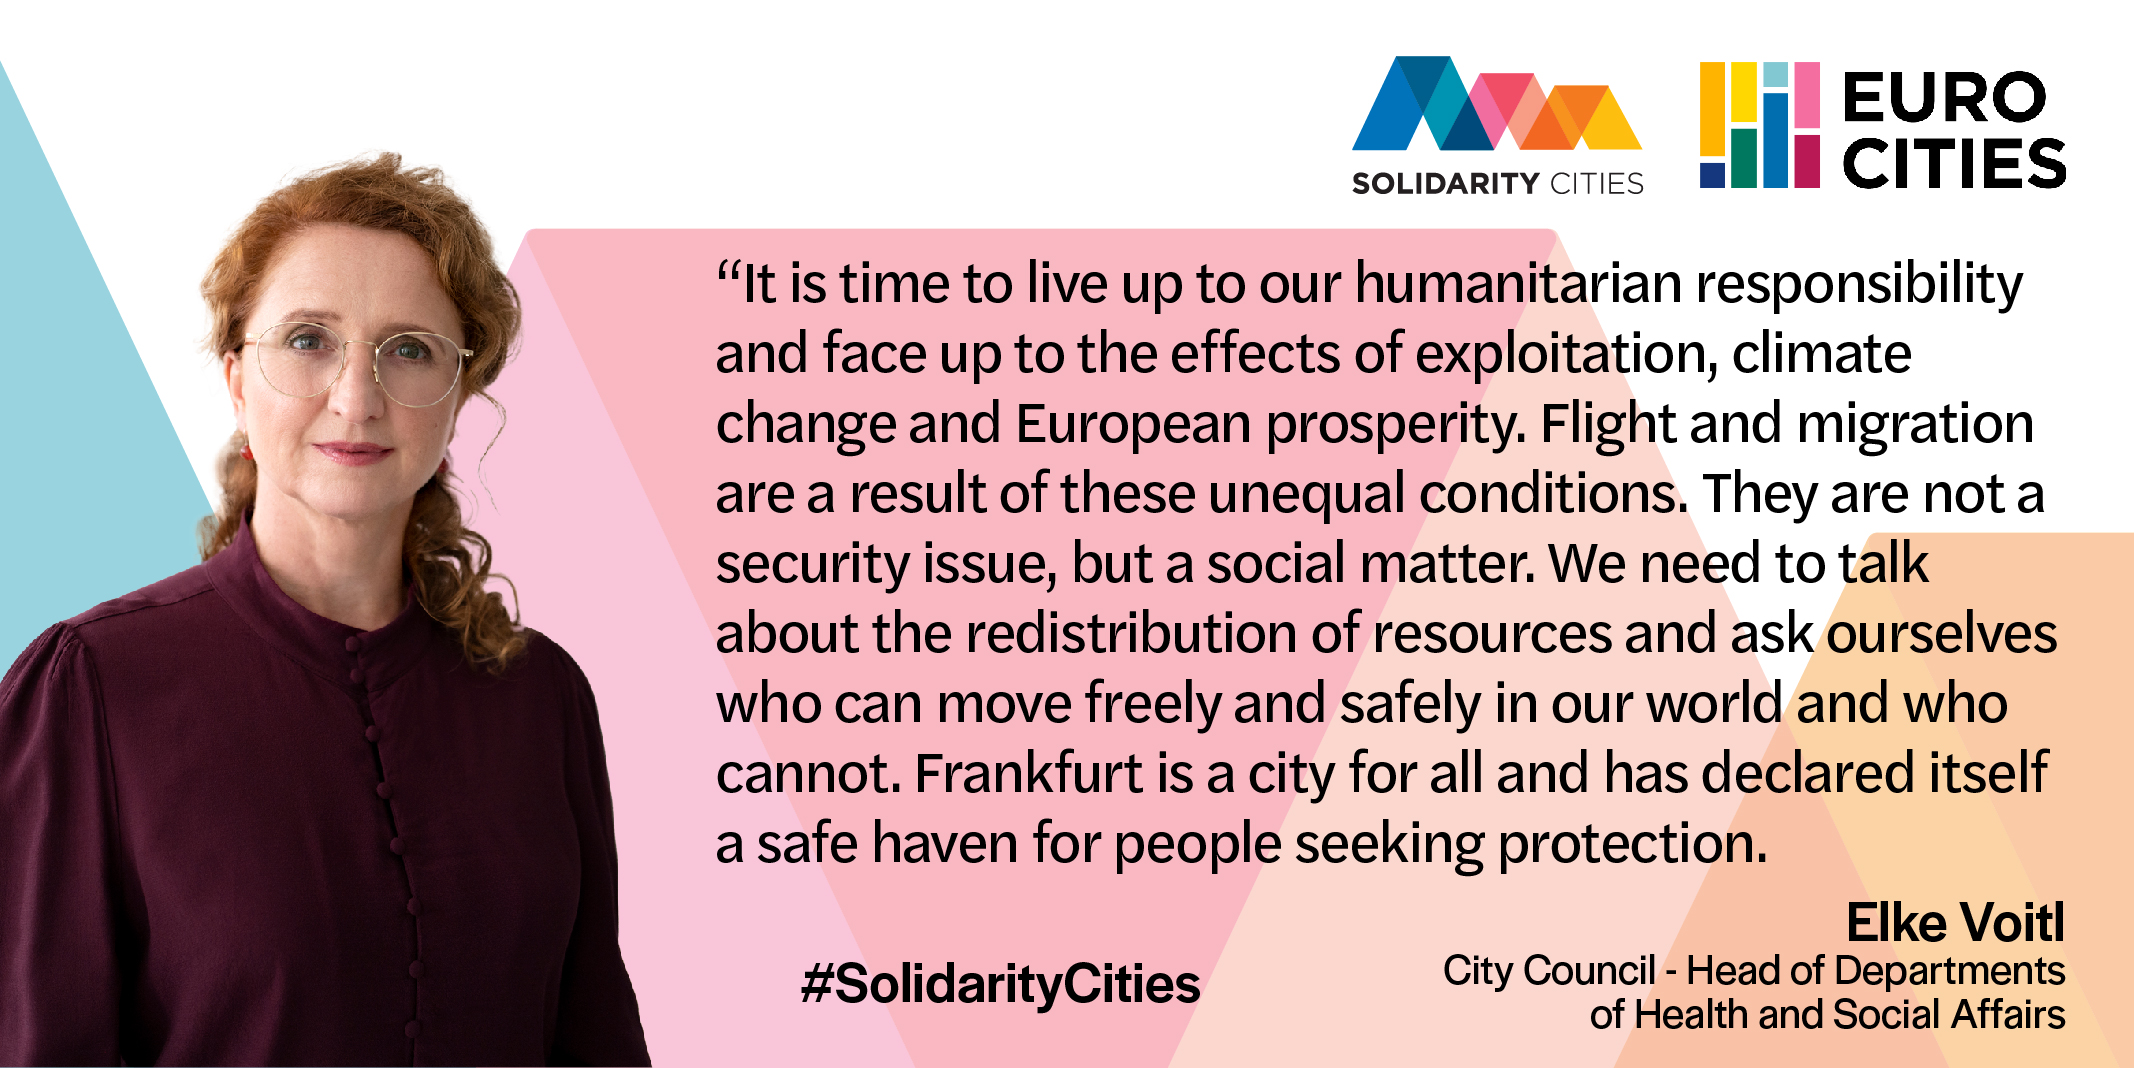 Elke Voitl, Frankfurt's City Council - Head of Departments of Health and Social Affairs, on Solidarity Cities